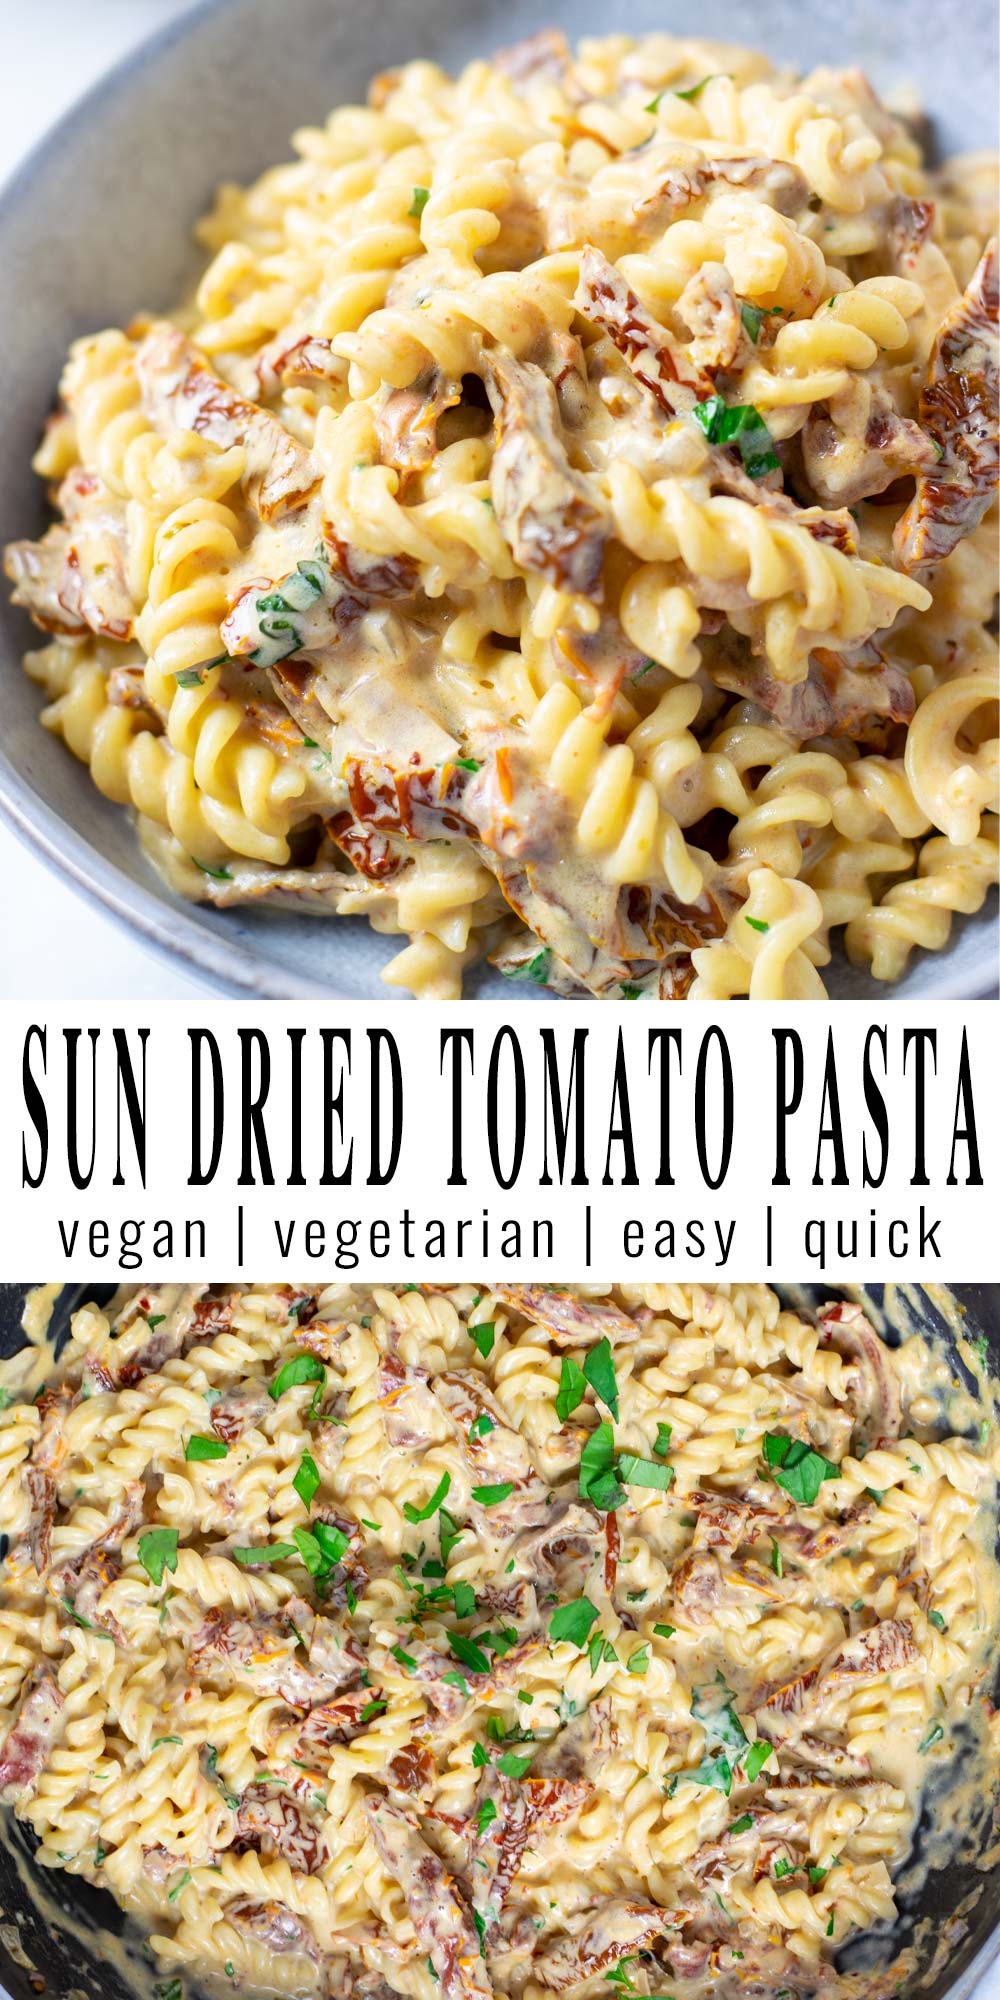 Collage of two pictures of the Sun Dried Tomato Pasta with recipe title text.